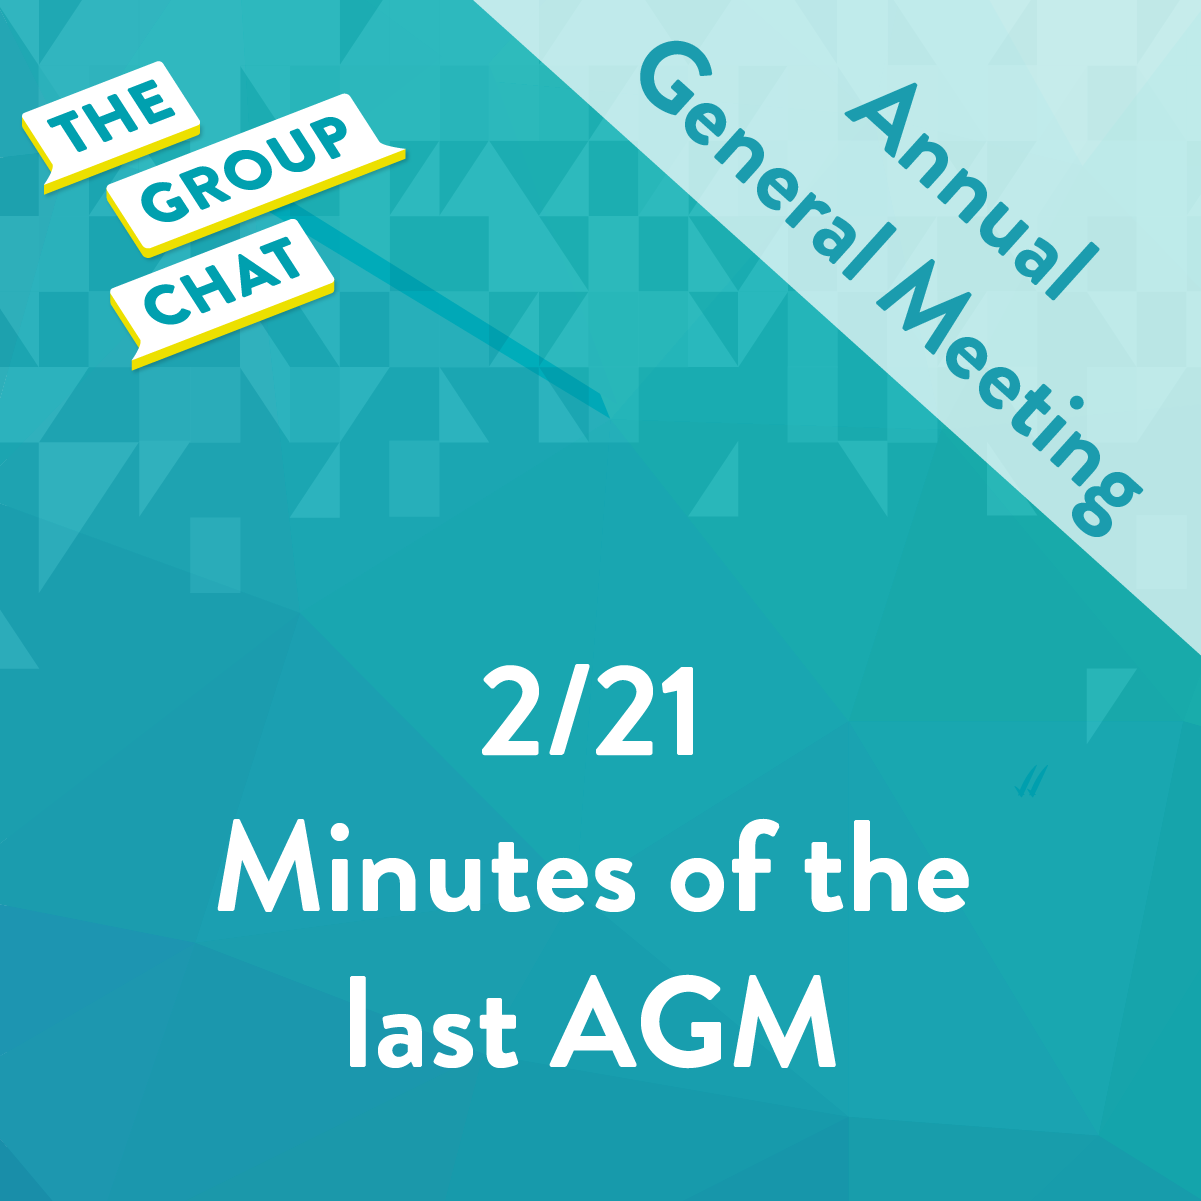 2/21 Minutes of the last Annual General Meeting